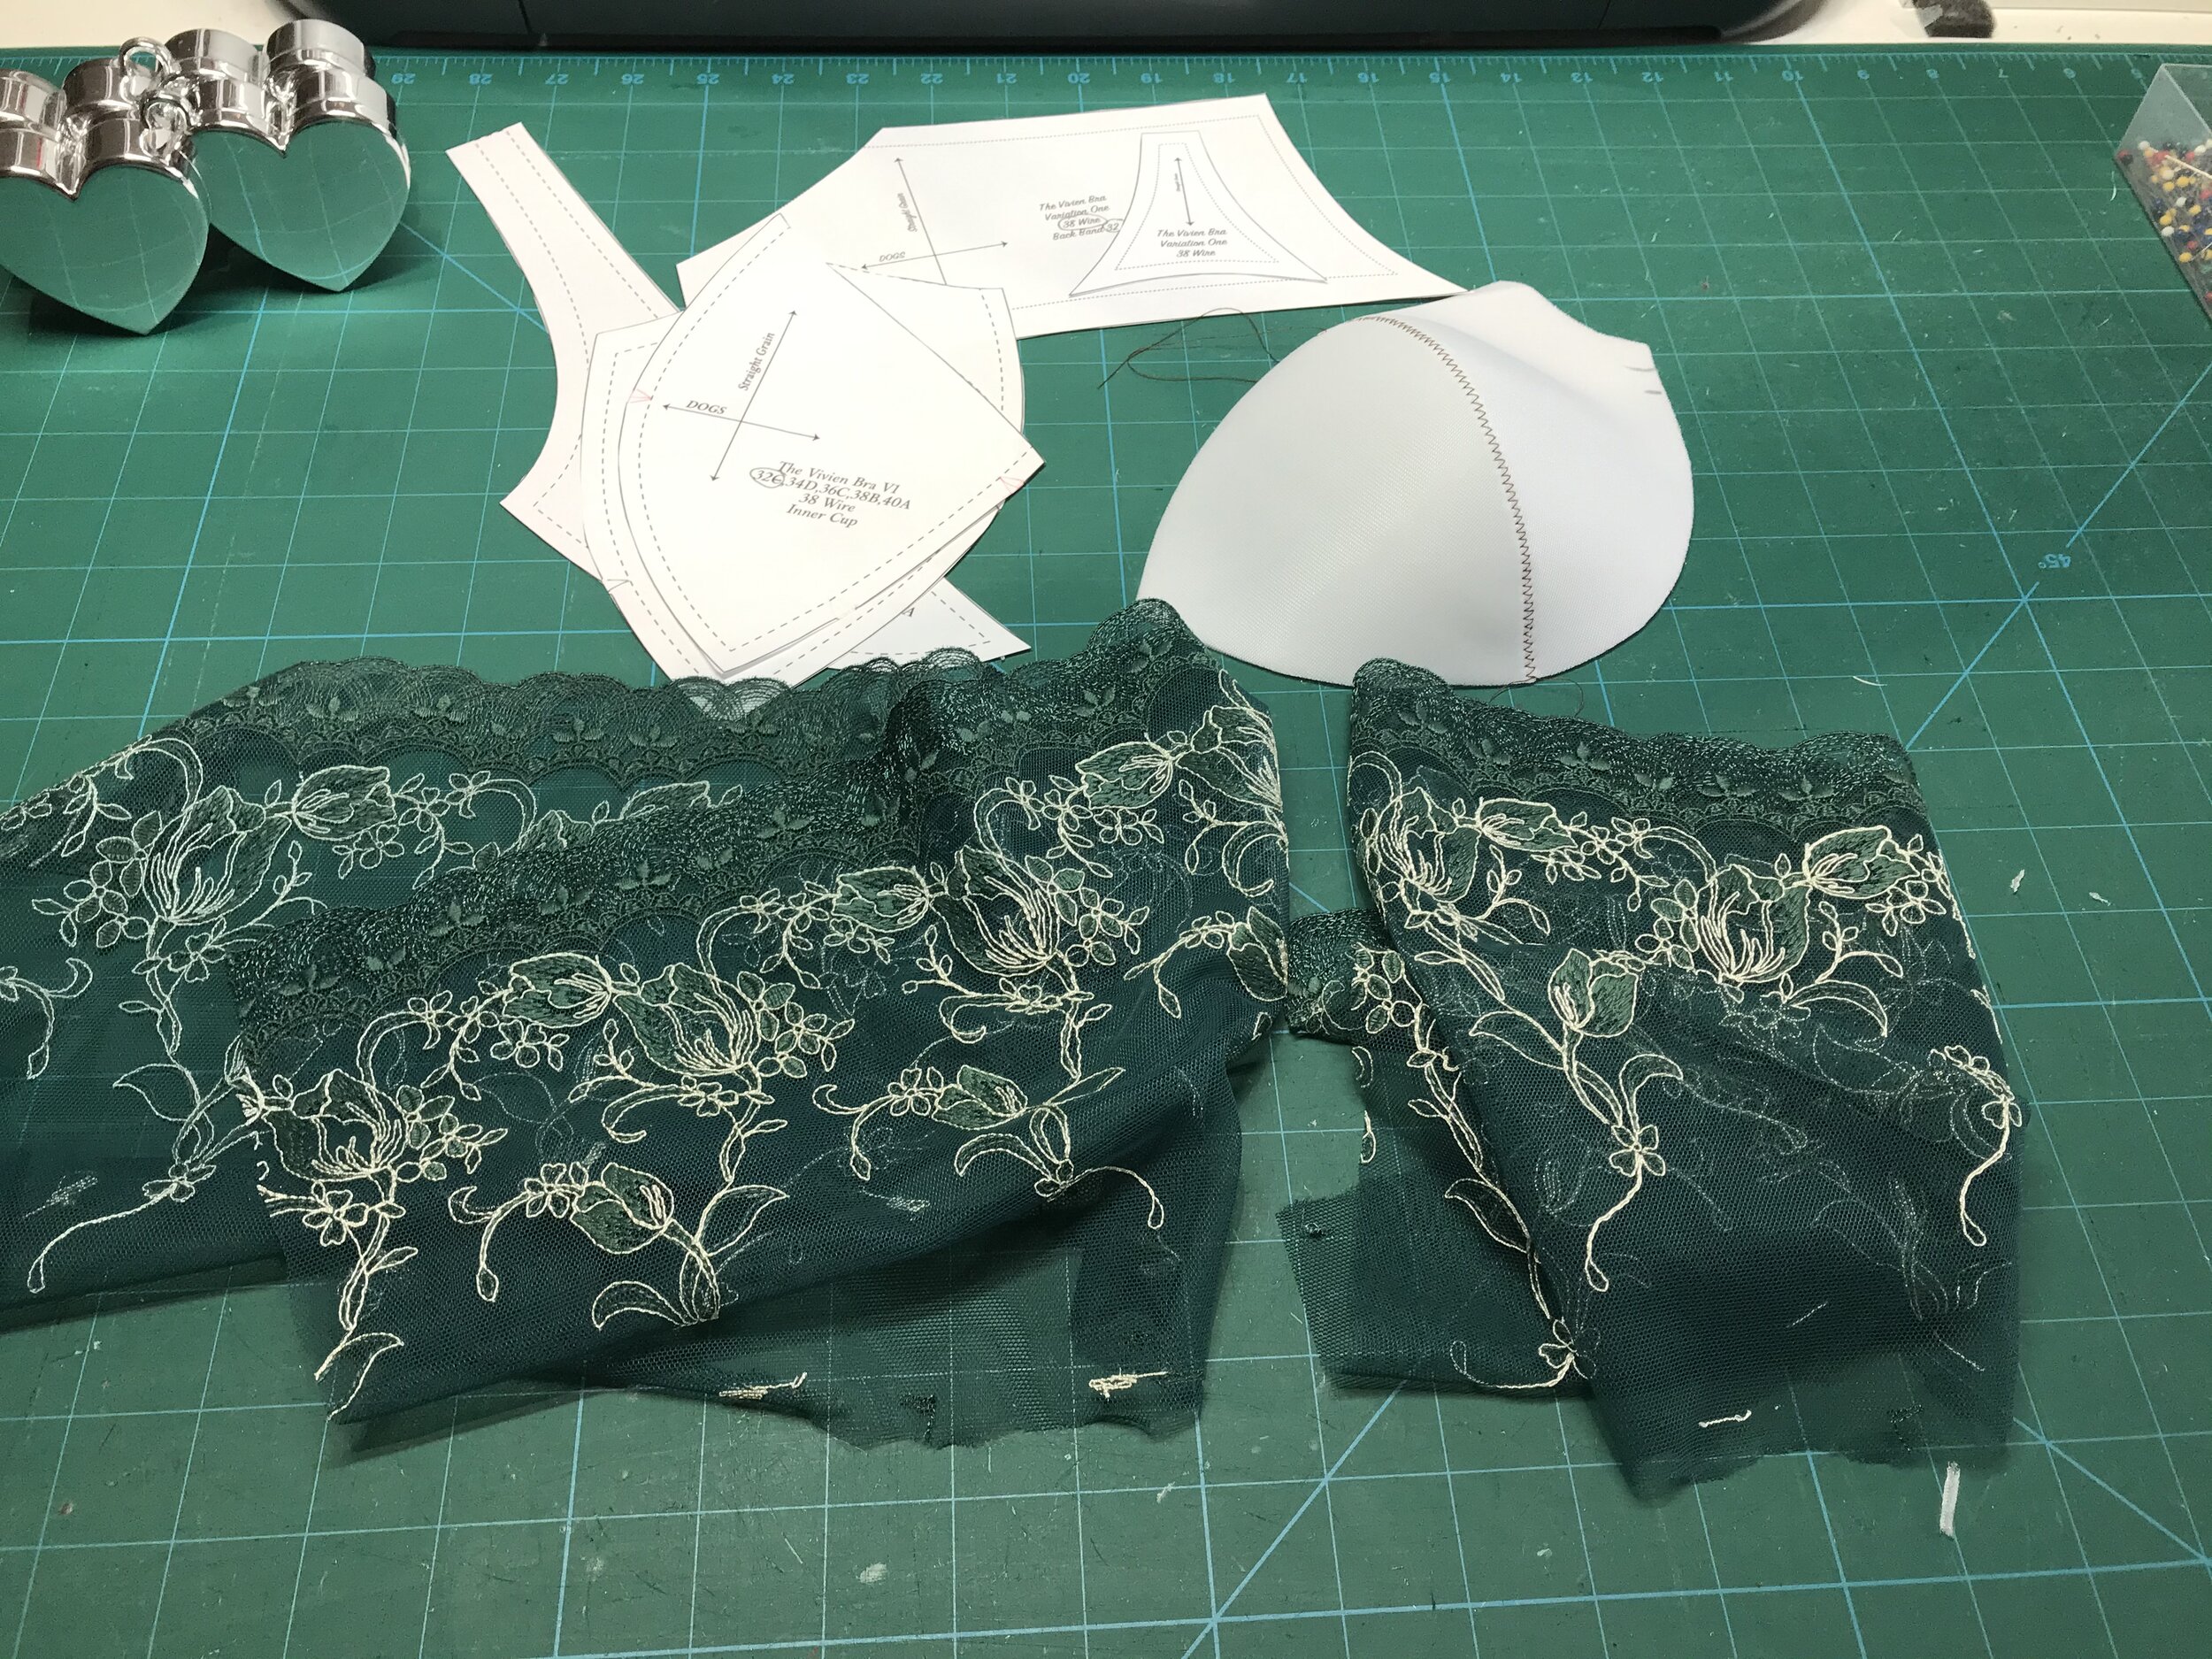 How to sew a bra - Step 3: A glance on the pattern pieces – AFI